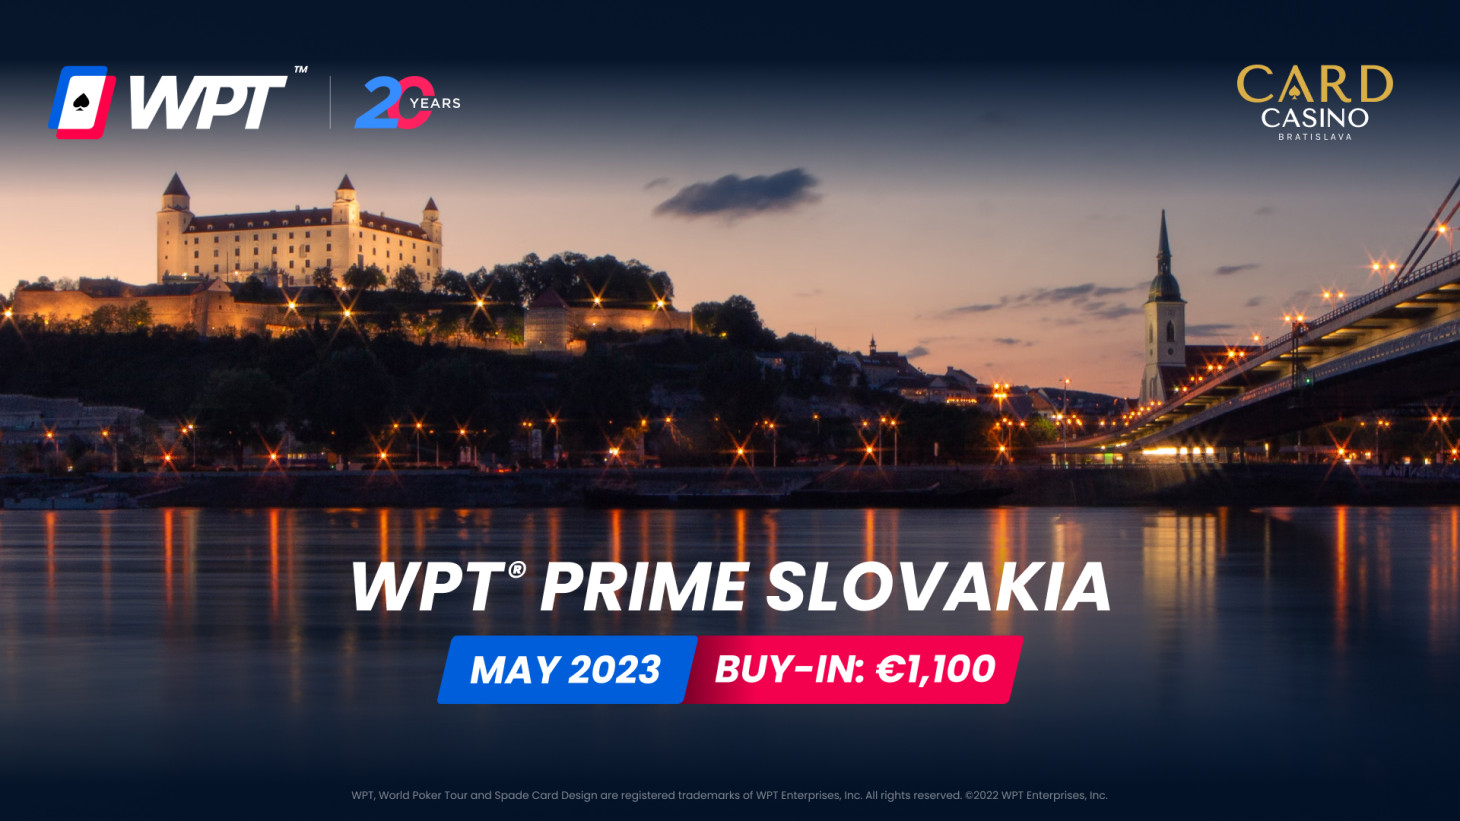 Poker bomb! Card Casino to Welcome the World Poker Tour® PRIME Slovakia Tournament in May 2023